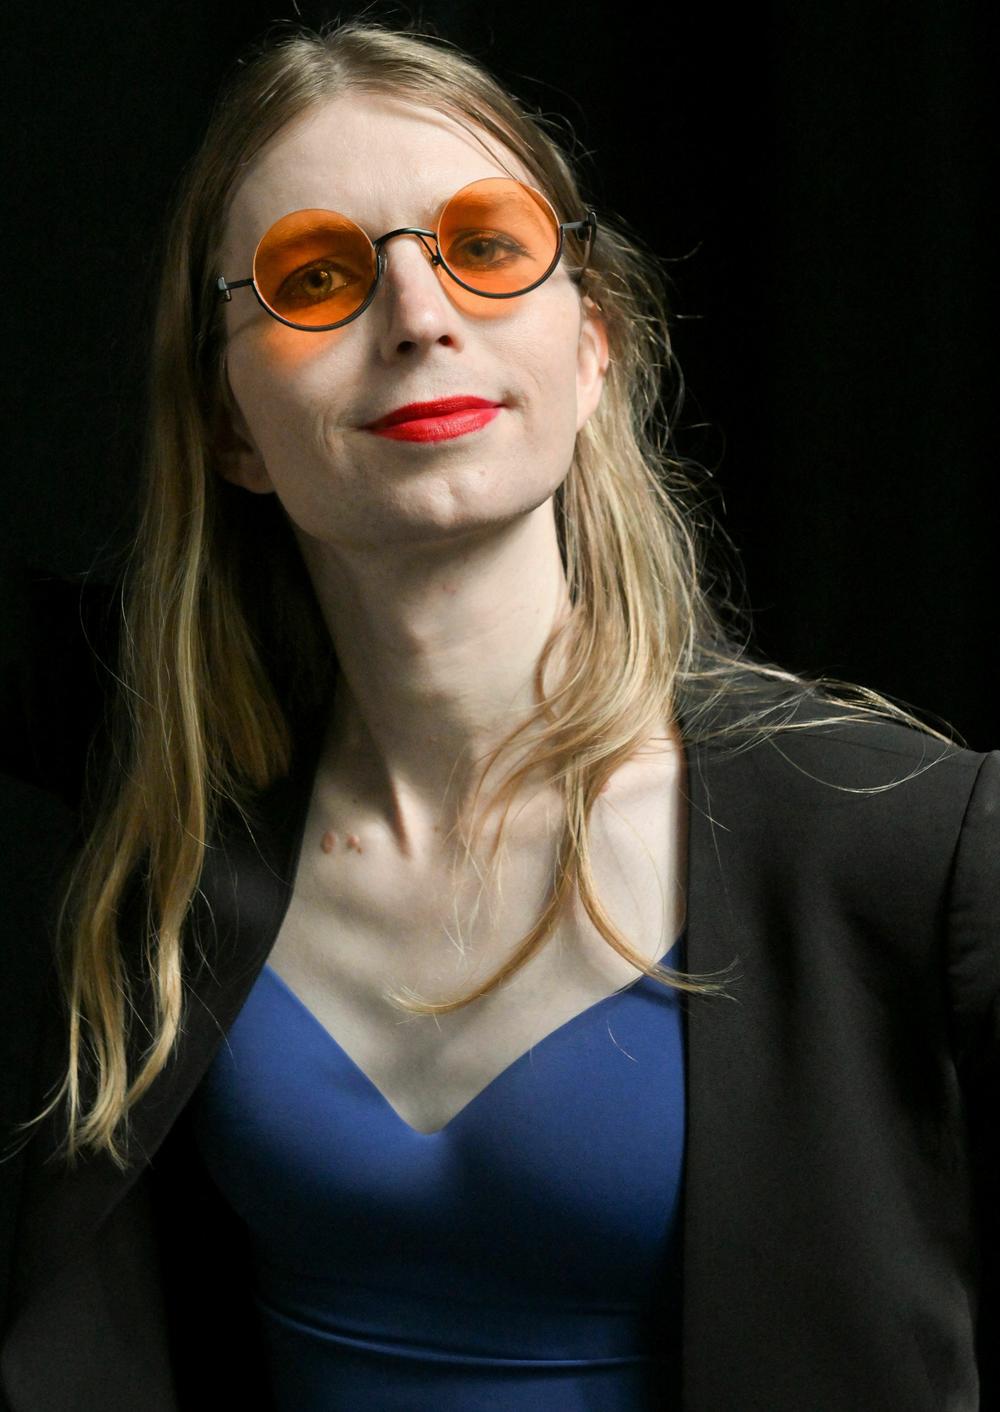 Chelsea Manning, pictured in 2022, spoke to NPR about her experiences of transitioning while incarcerated.